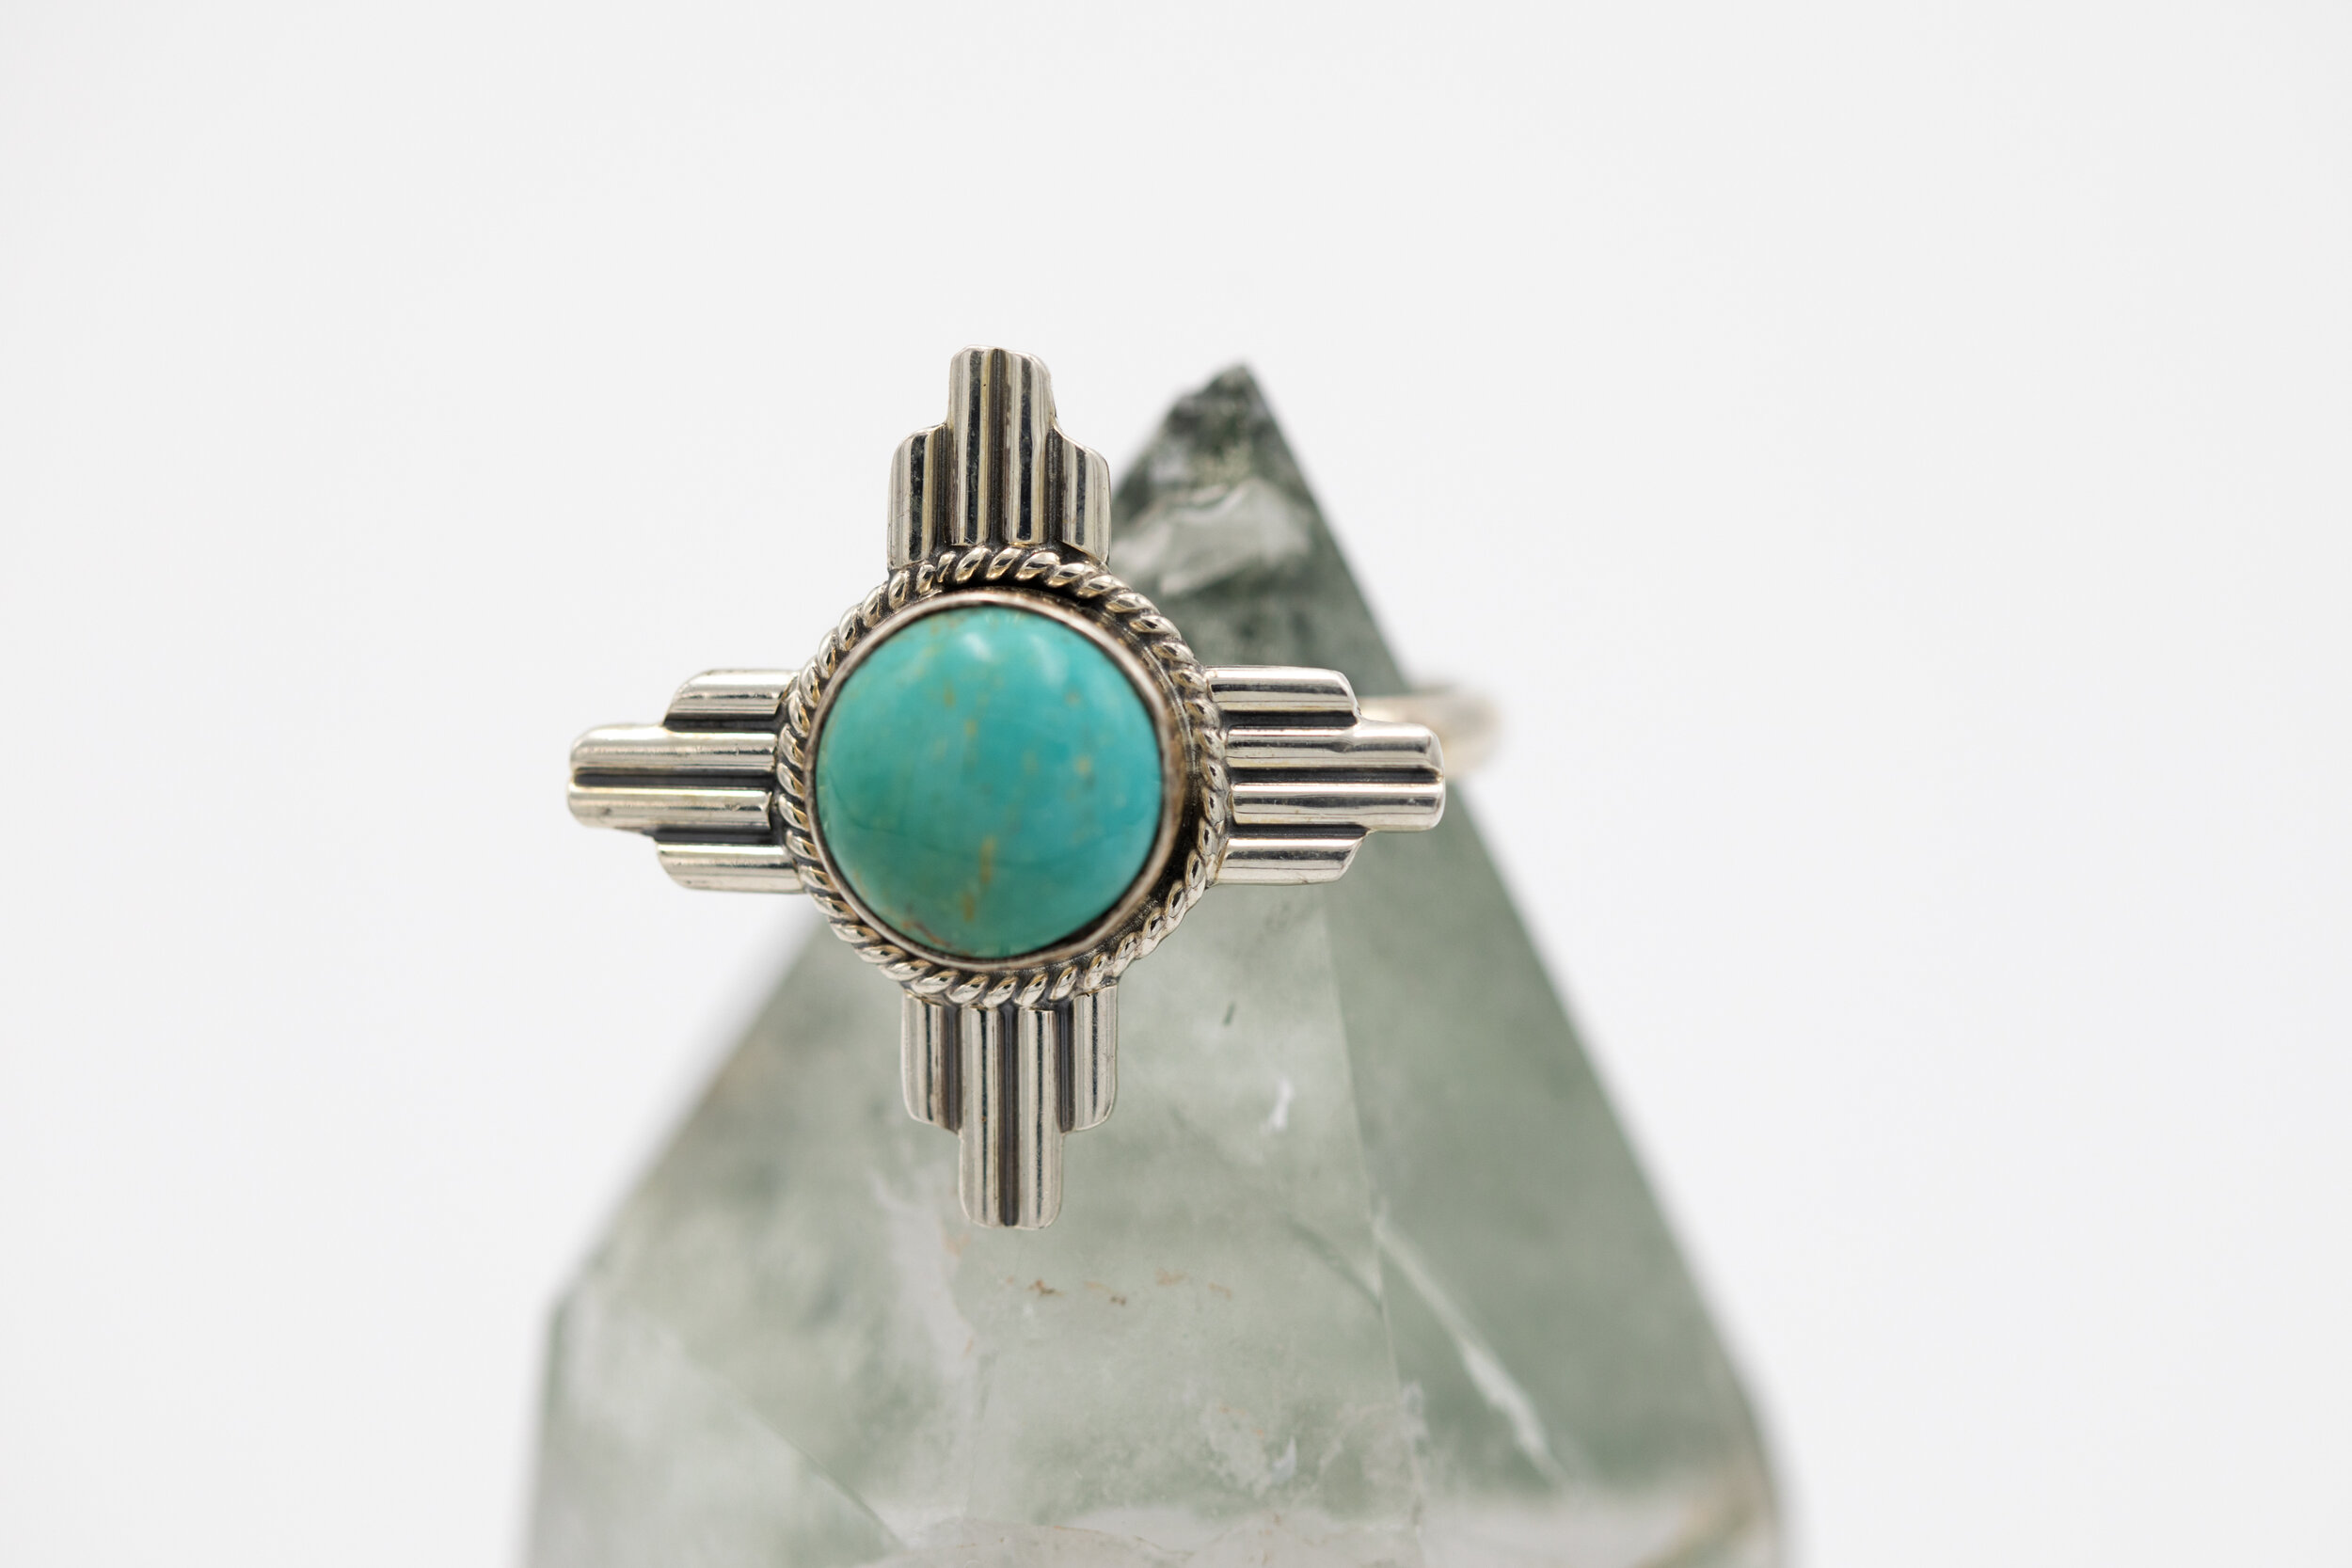 Details about   Navajo Signed NW Adjustable .925 Silver Turquoise Coral Handmade Ring 